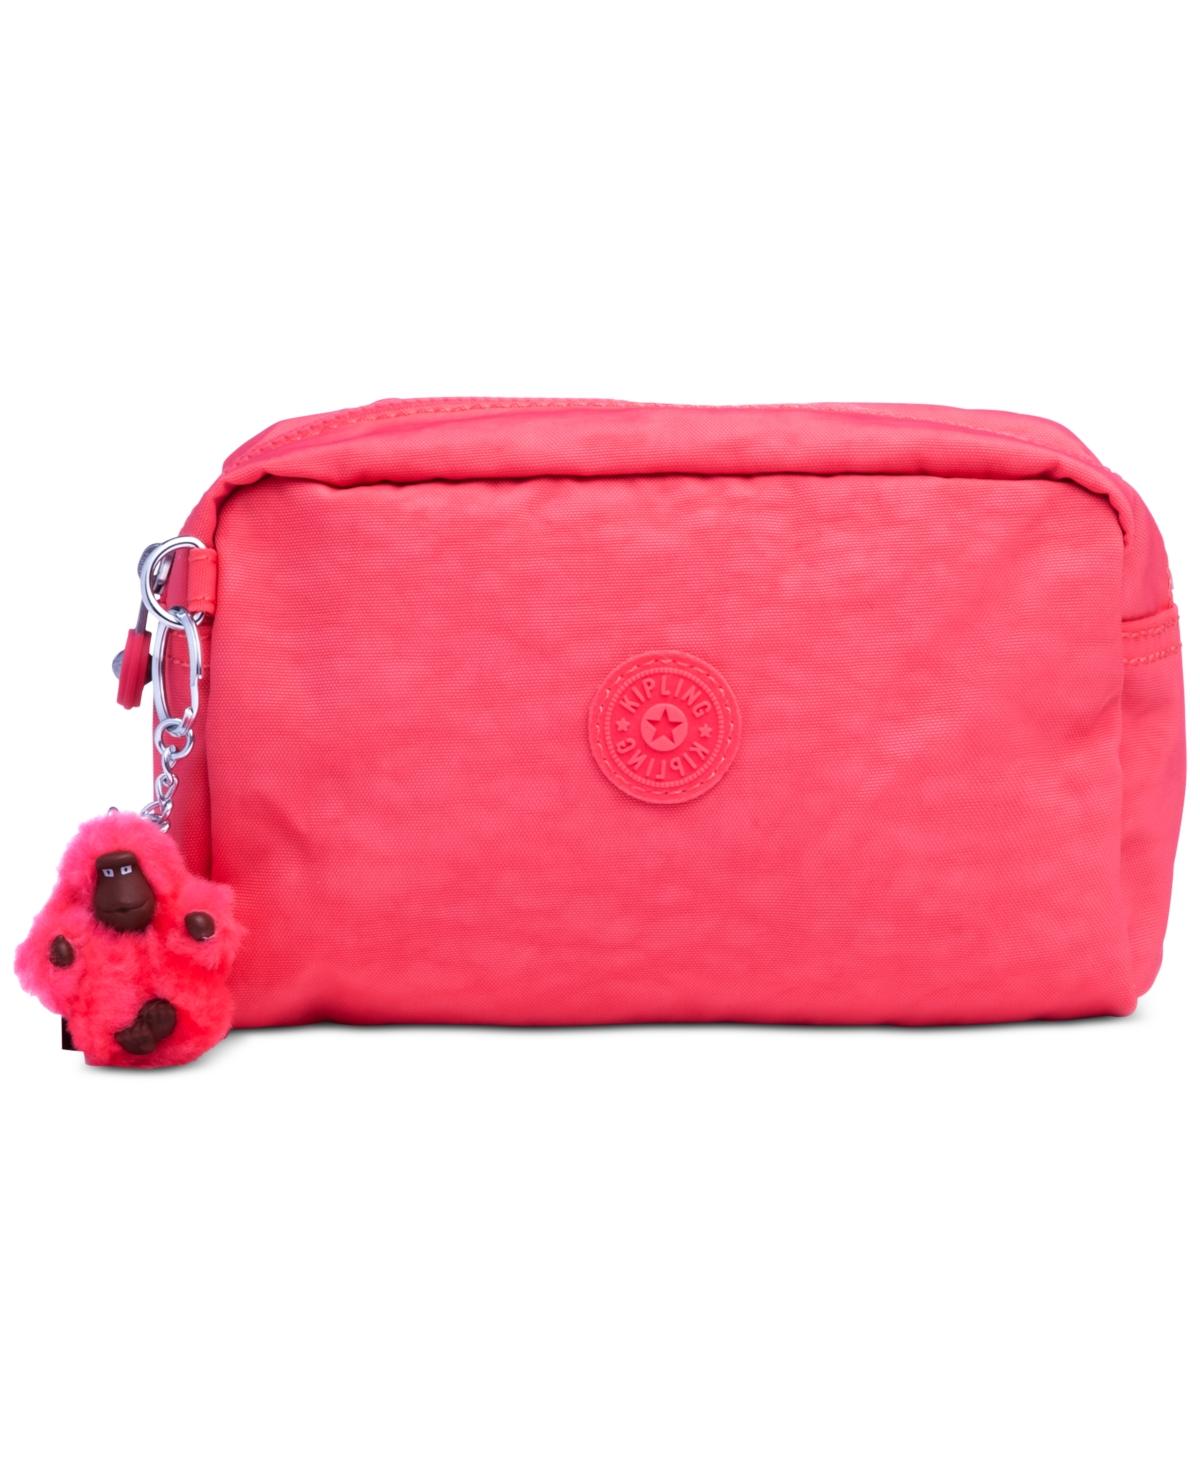 Kipling Gleam Pouch Cosmetic Case Bright Metallic : One Size